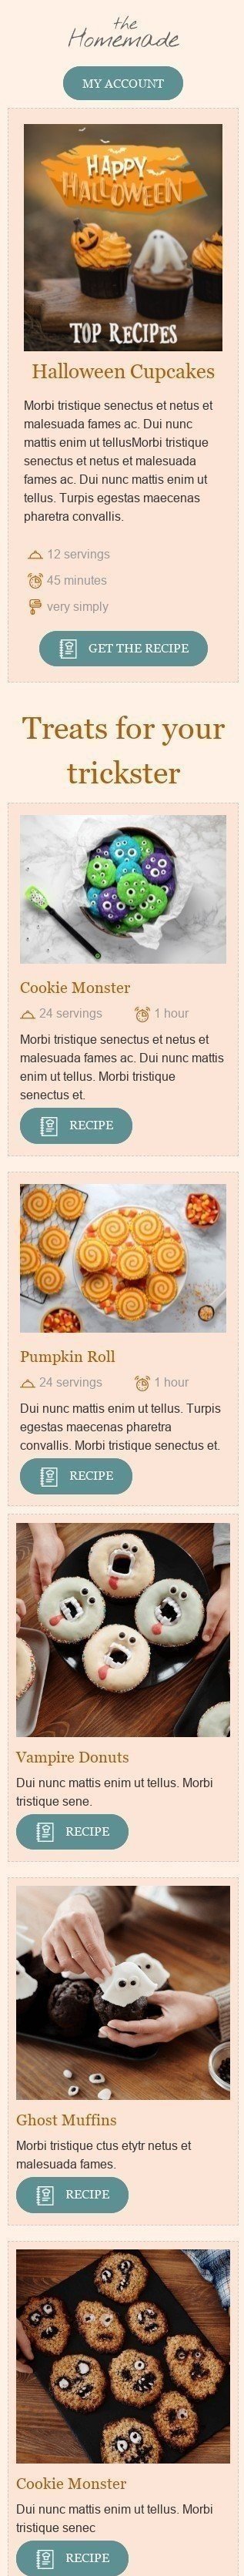 Halloween Email Template «Halloween cupcakes» for Food industry mobile view